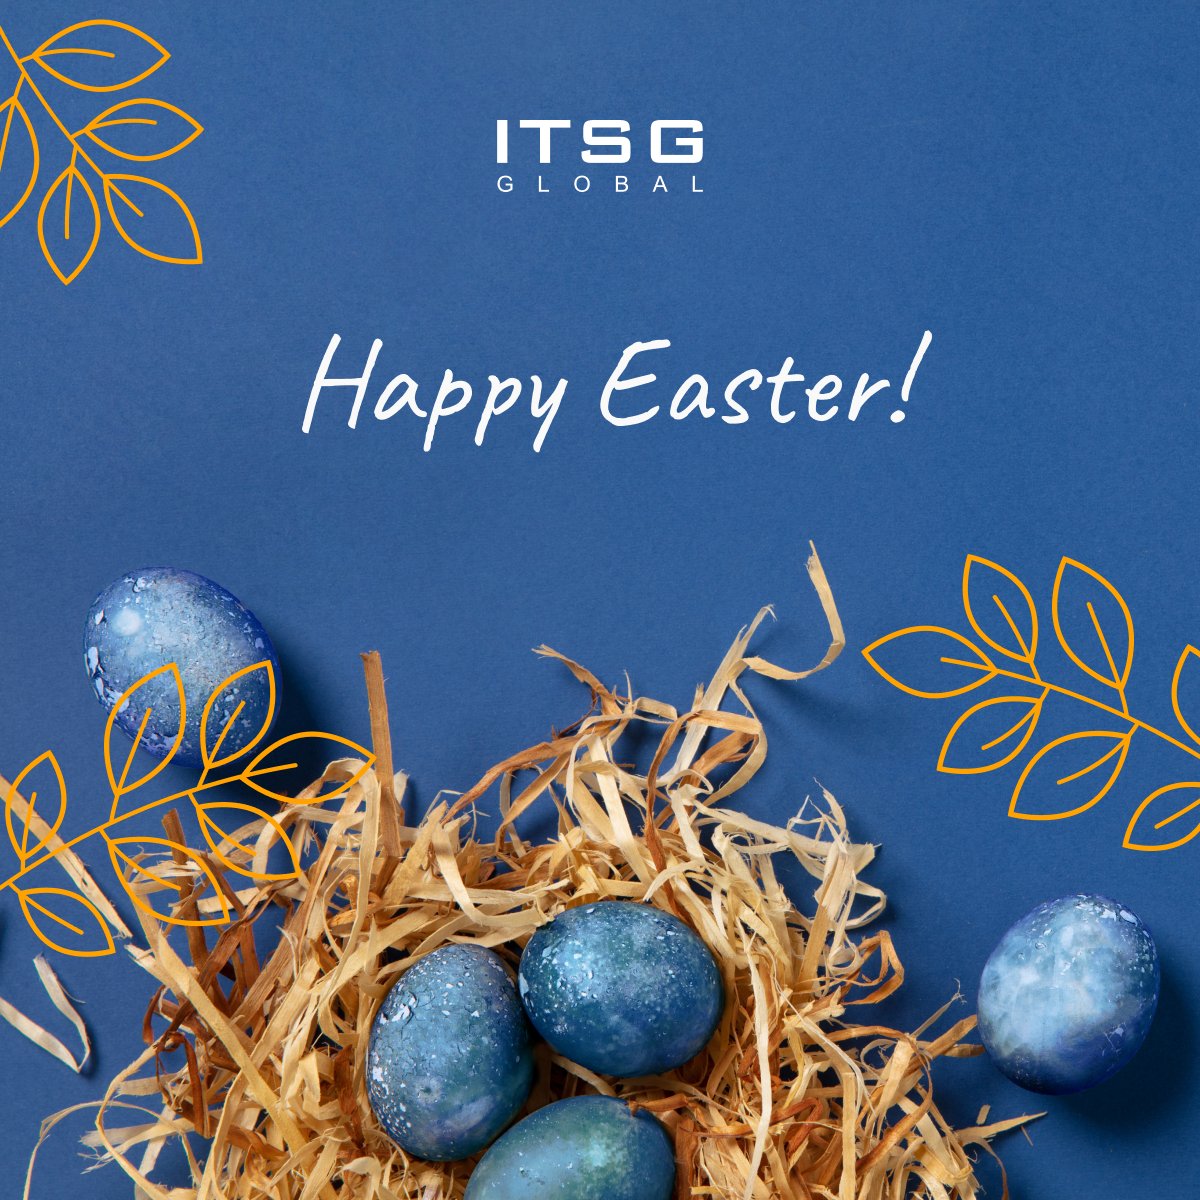 The whole ITSG team sends you warm wishes for an Easter brimming with happiness, development, and abundance. 🎊 #EasterGreetings #Thankfulness #Collaboration #Prosperity #EasterJoy #SpringRenewal